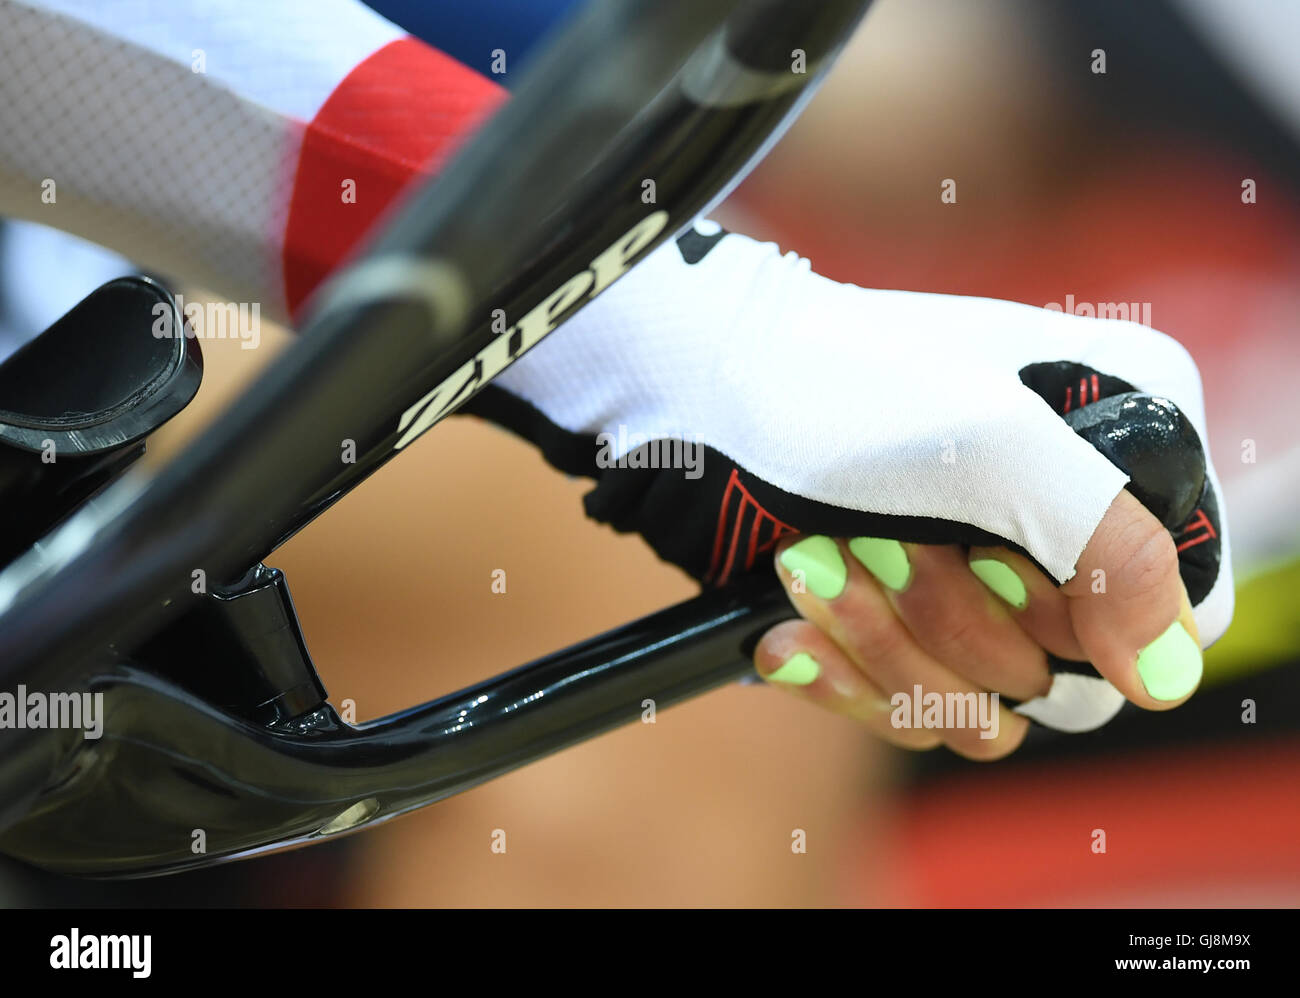 Rio de Janeiro, Brazil. 13th Aug, 2016. One member of team of Canada has her fingernails painted in lime green during the bronze medal race of the Women's Team Pursuit Final of the Rio 2016 Olympic Games Track Cycling events at Velodrome in Rio de Janeiro, Brazil, 13 August 2016. Photo: Felix Kaestle/dpa/Alamy Live News Stock Photo